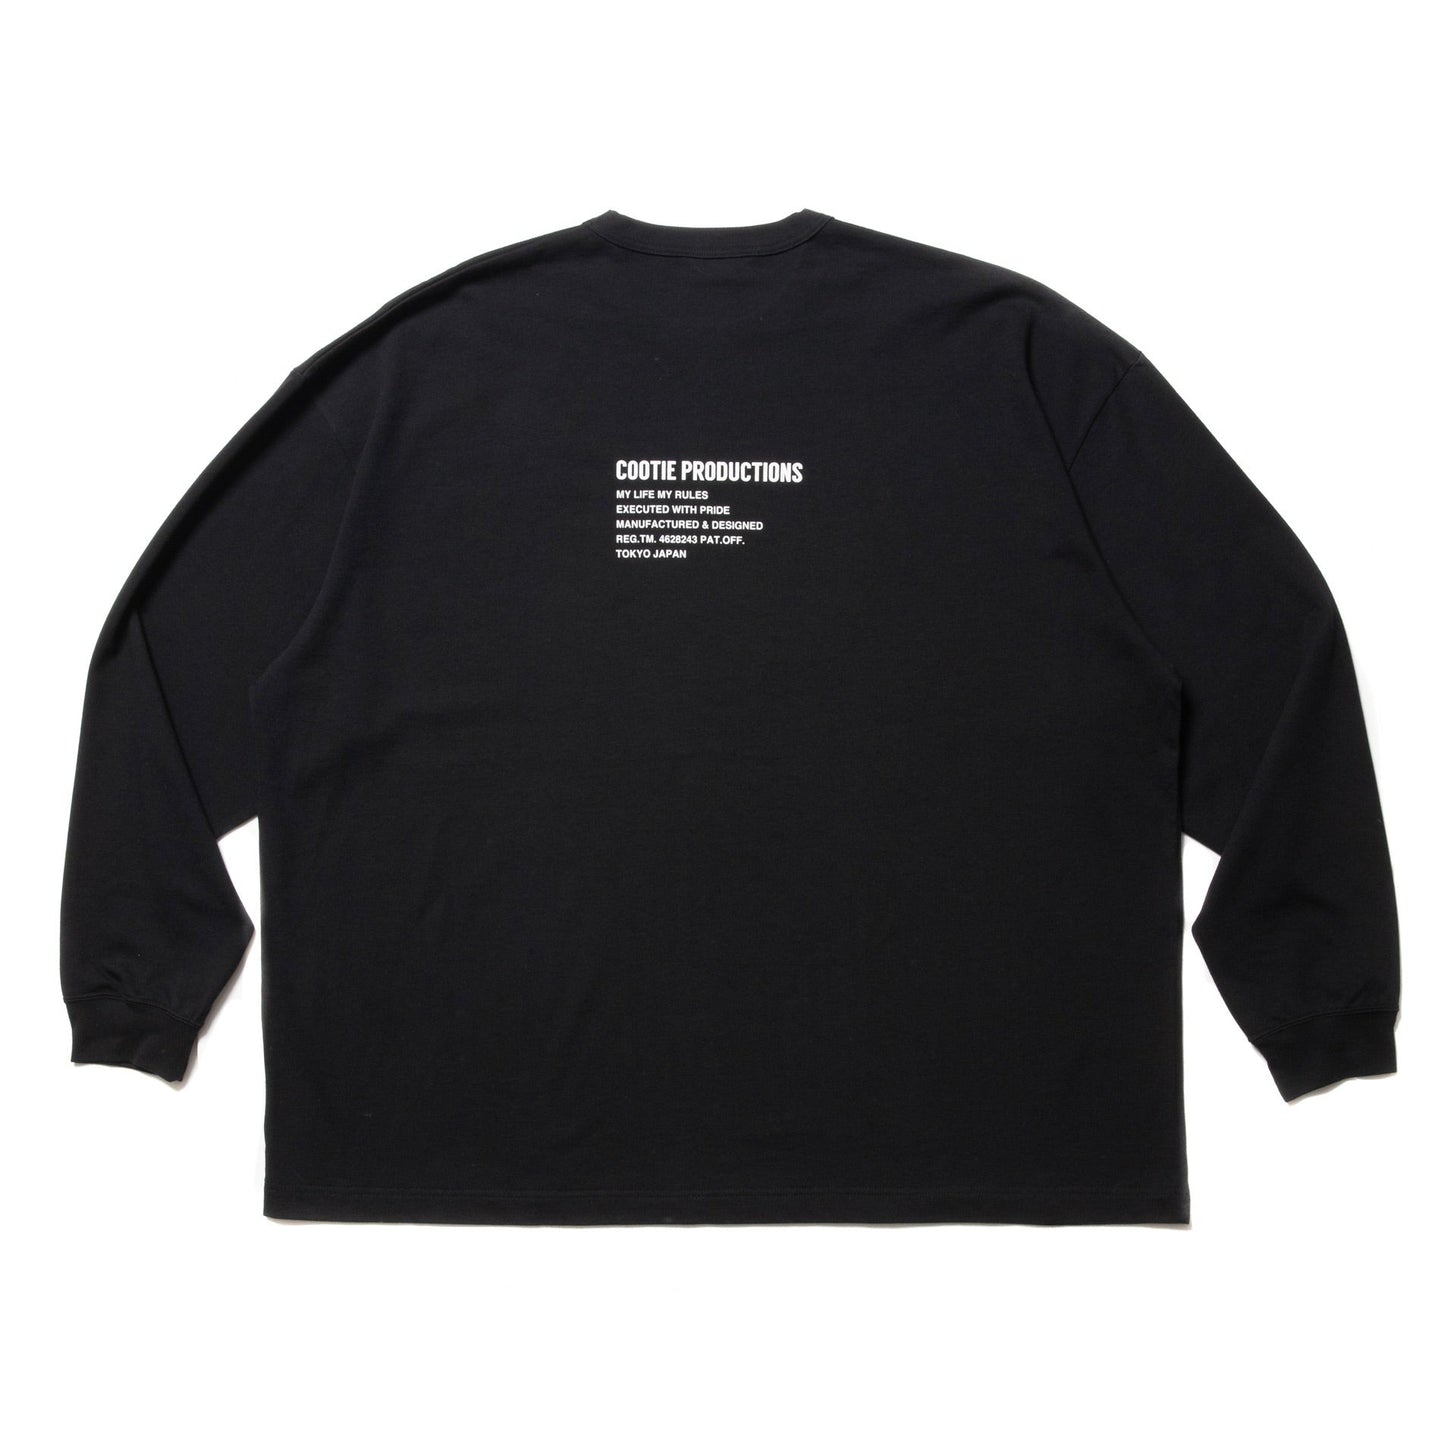 C/R Smooth Jersey L/S Tee